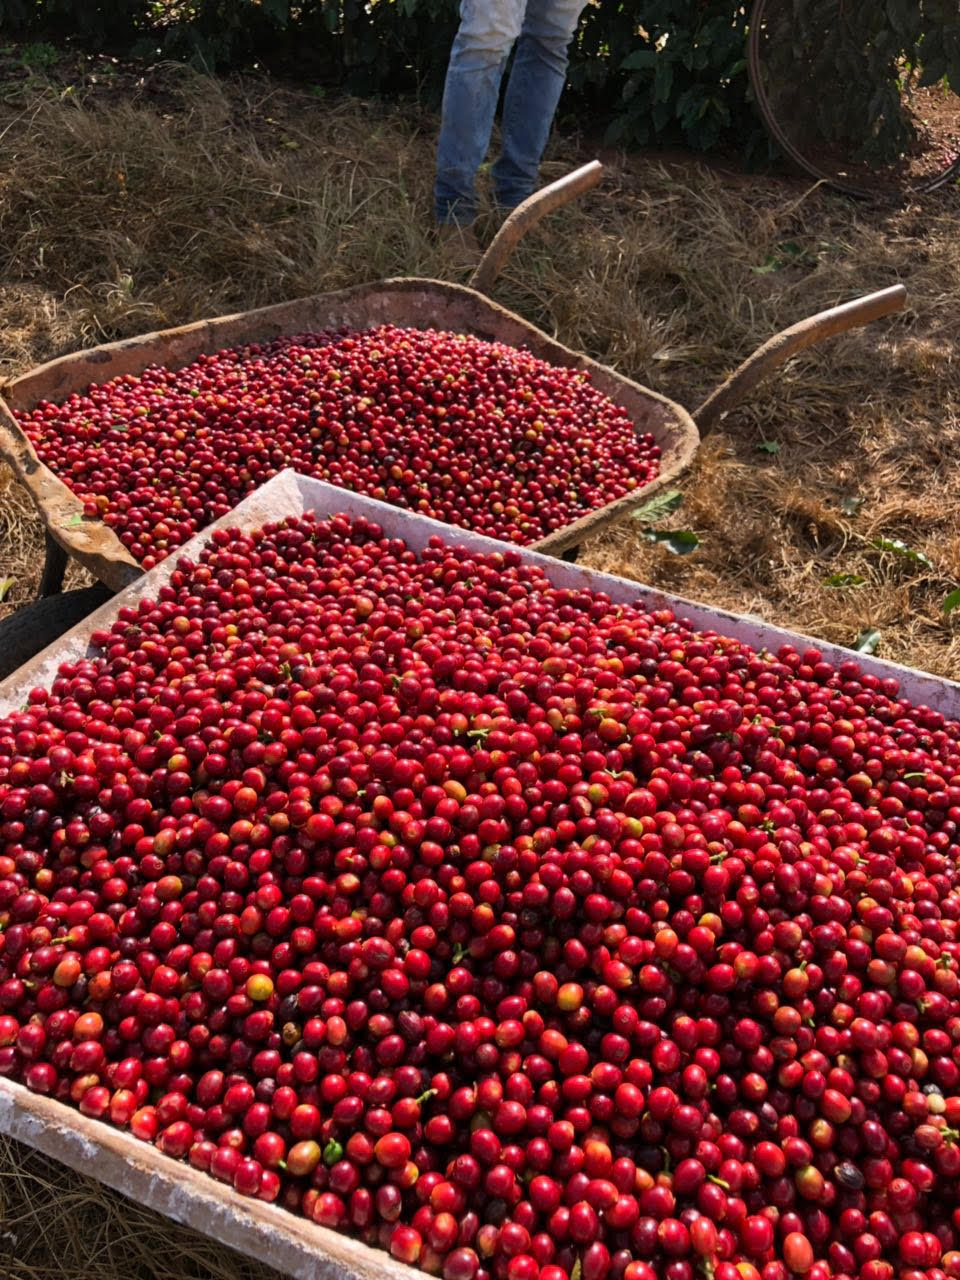 Coffee cherries fresh from the field